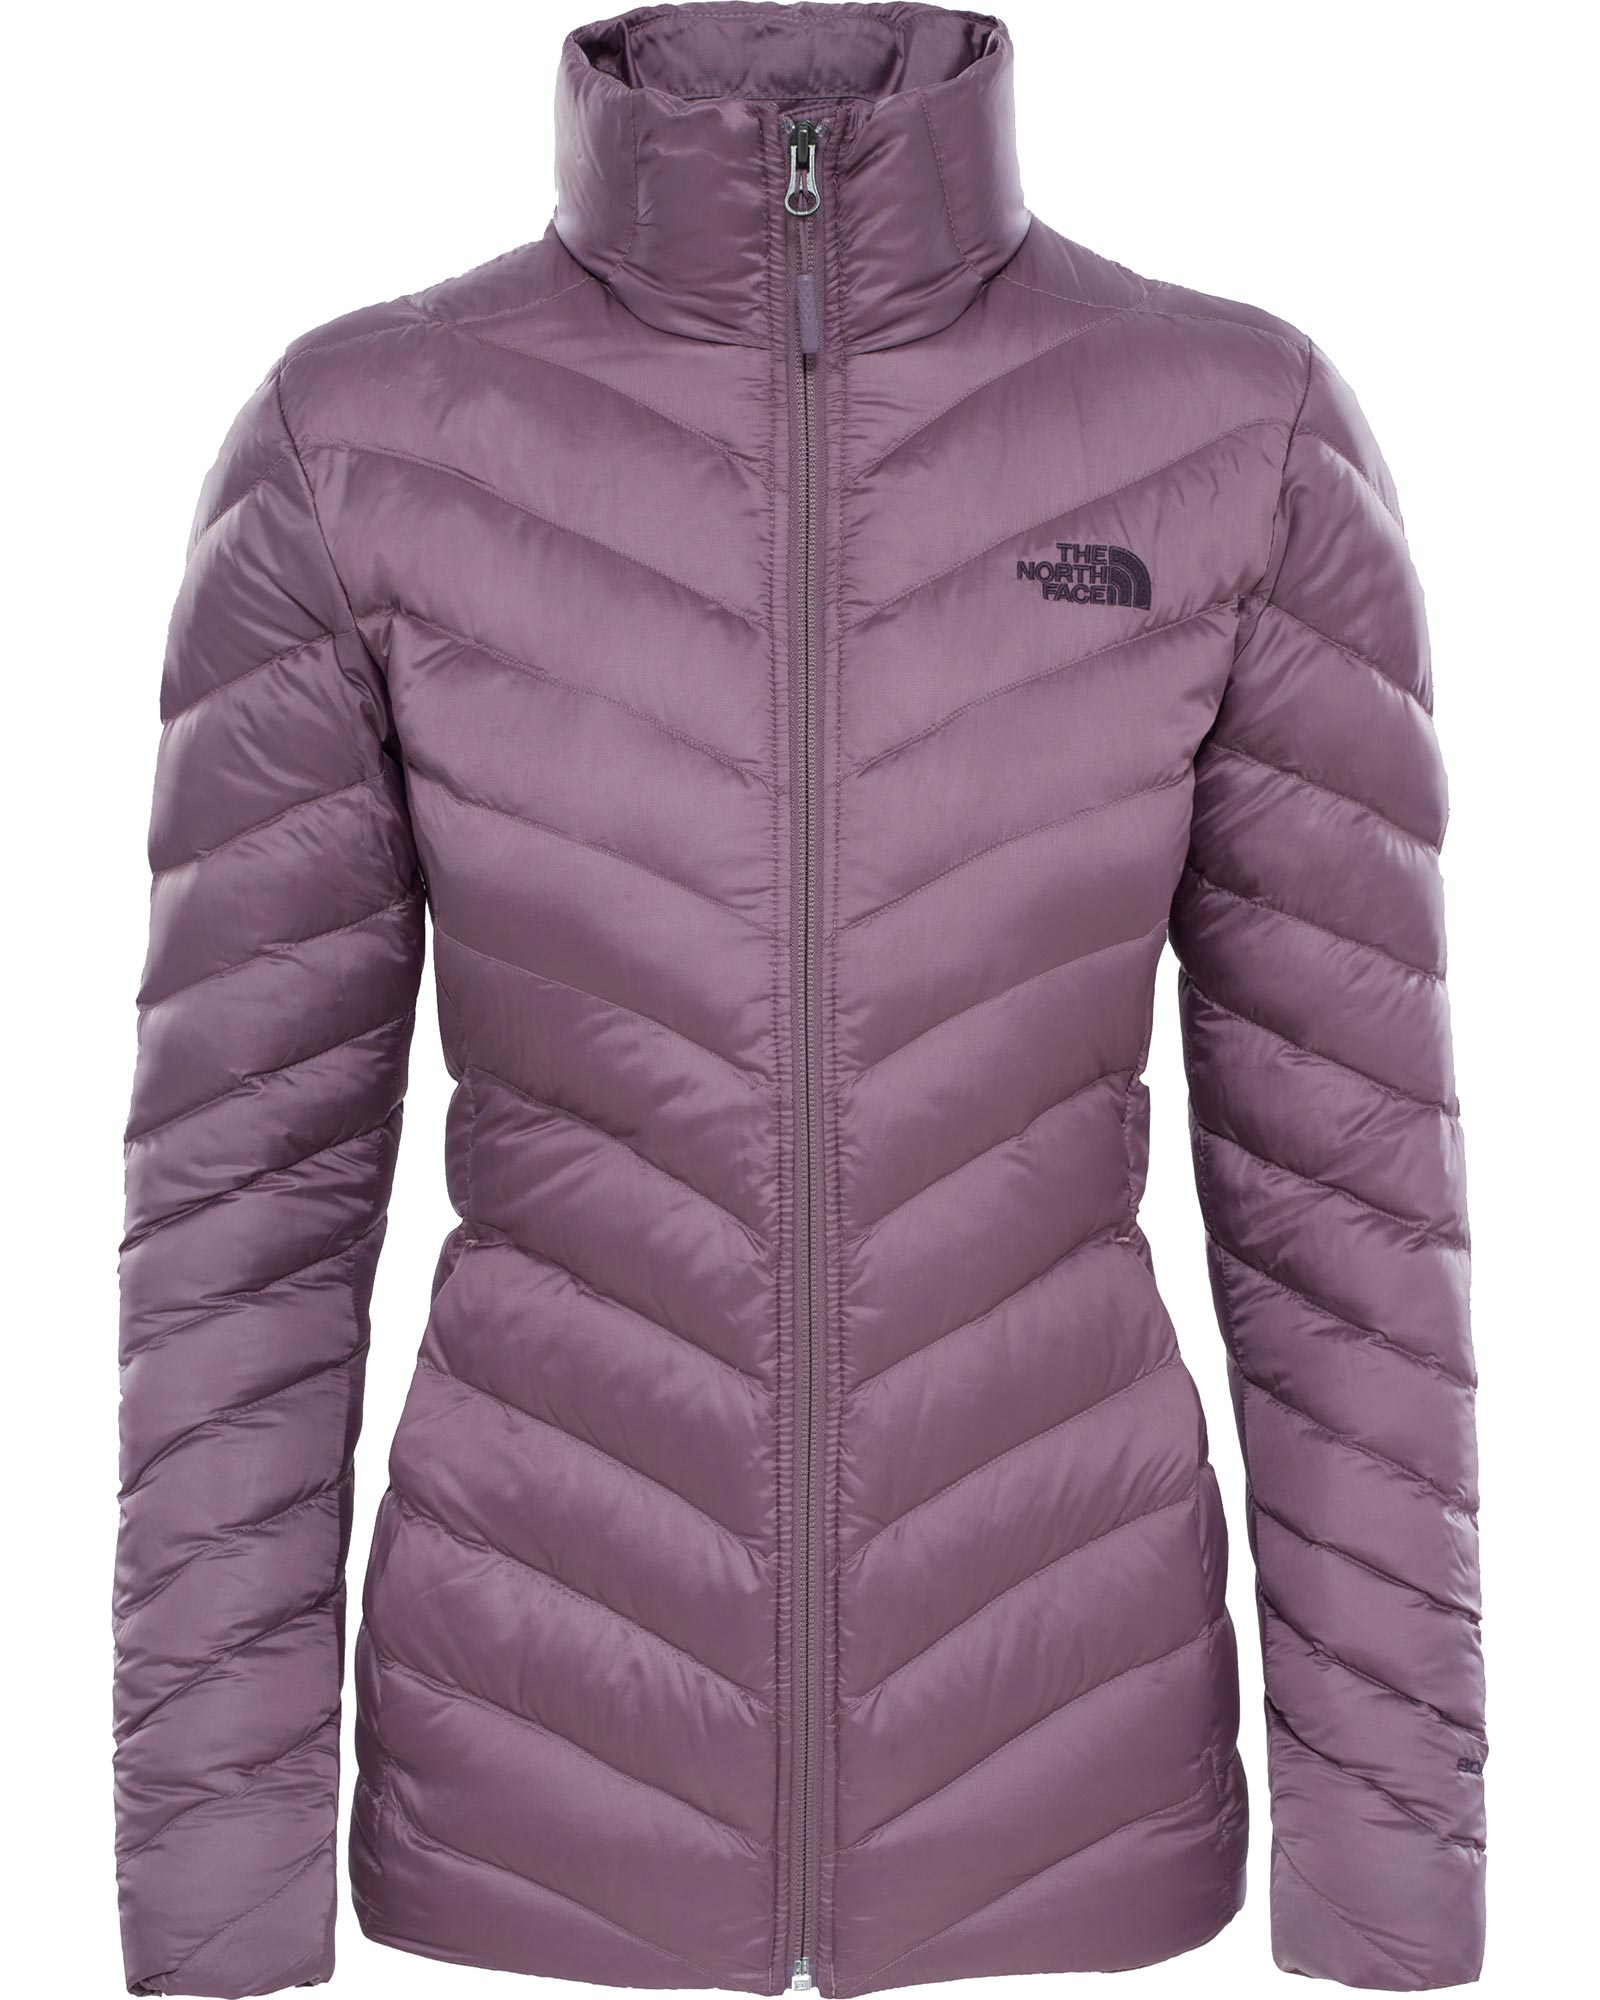 The North Face Trevail Women’s Jacket - Black Plum XS